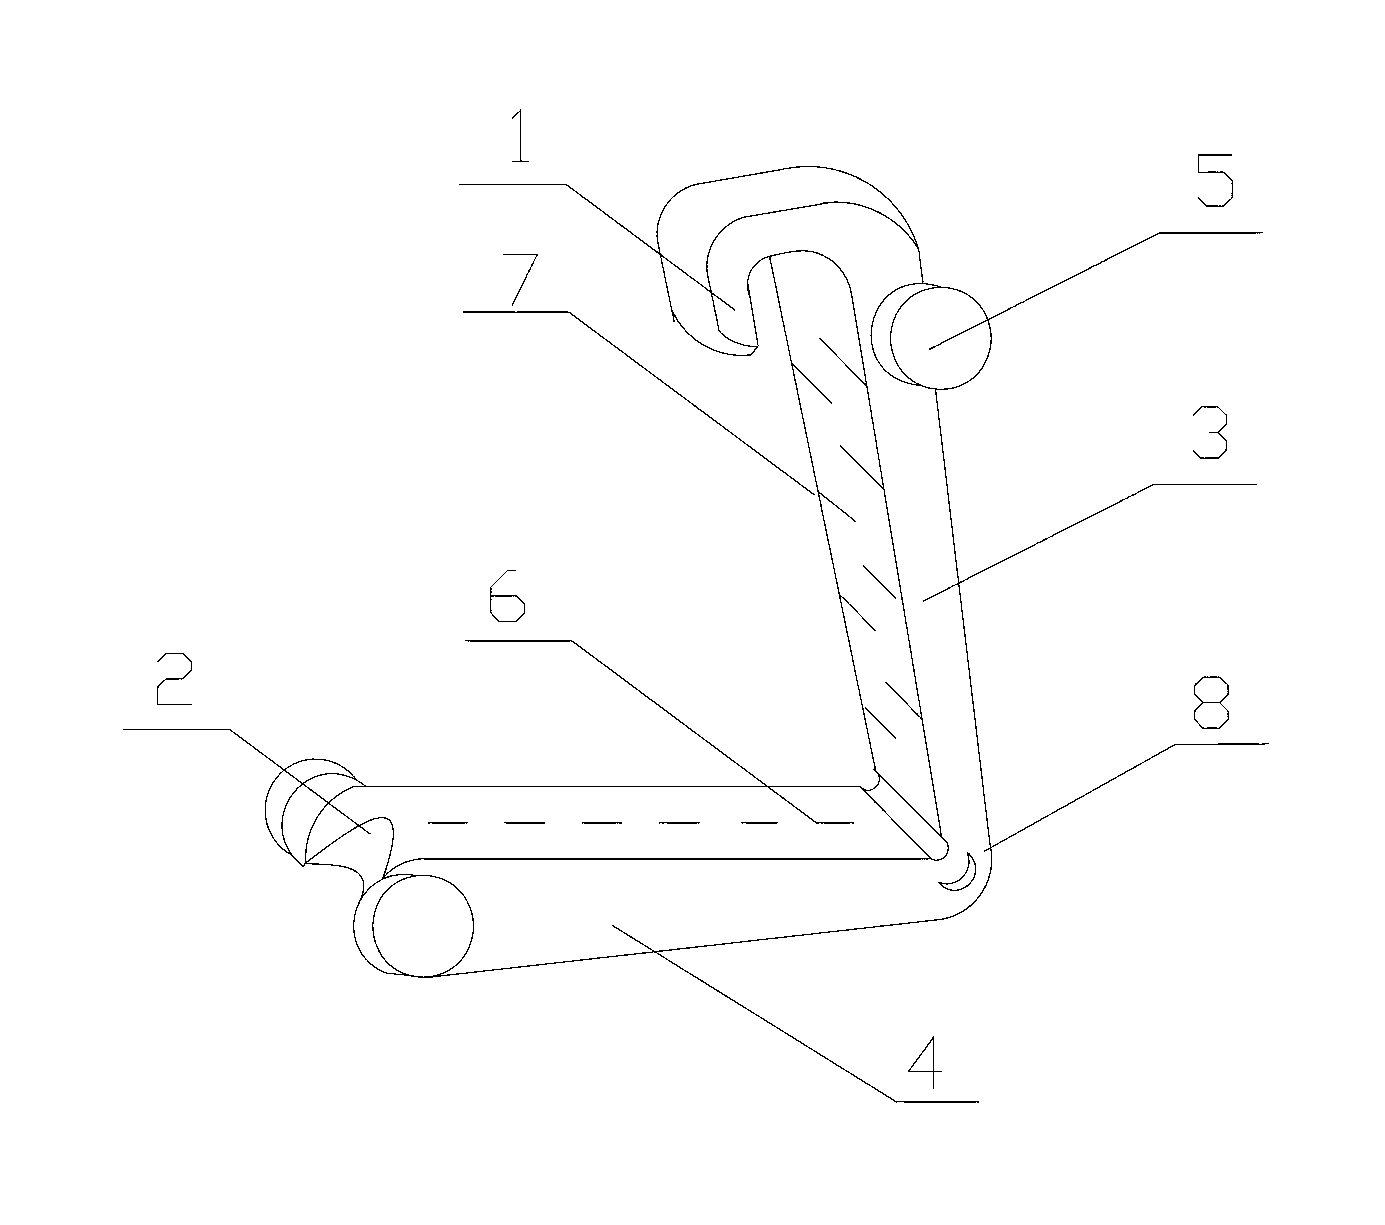 V-shaped vessel ligature clamp with single-layer structure and method for preparing V-shaped vessel ligature clamp